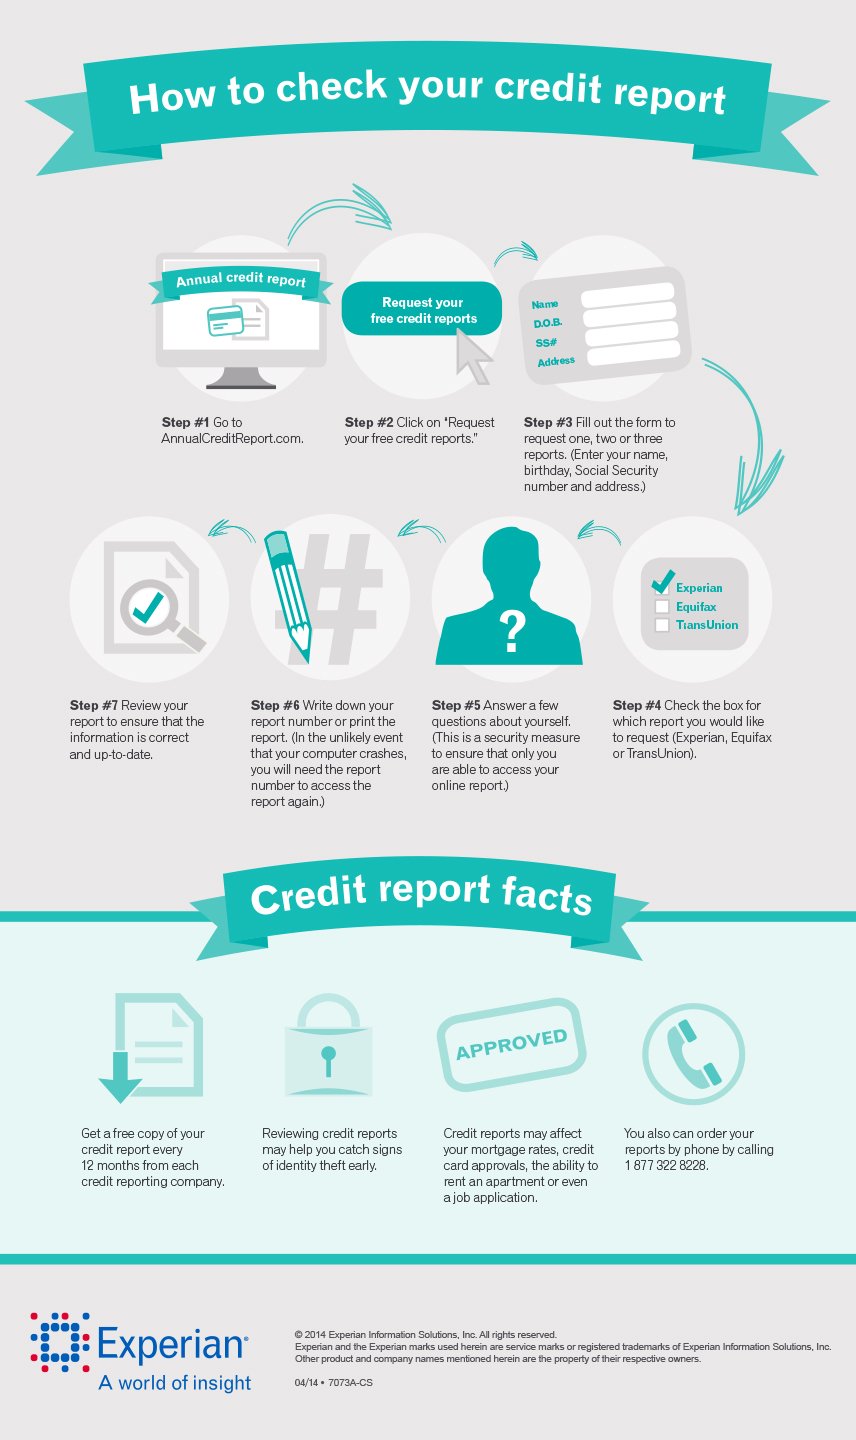 How to check your credit report [Infographic]